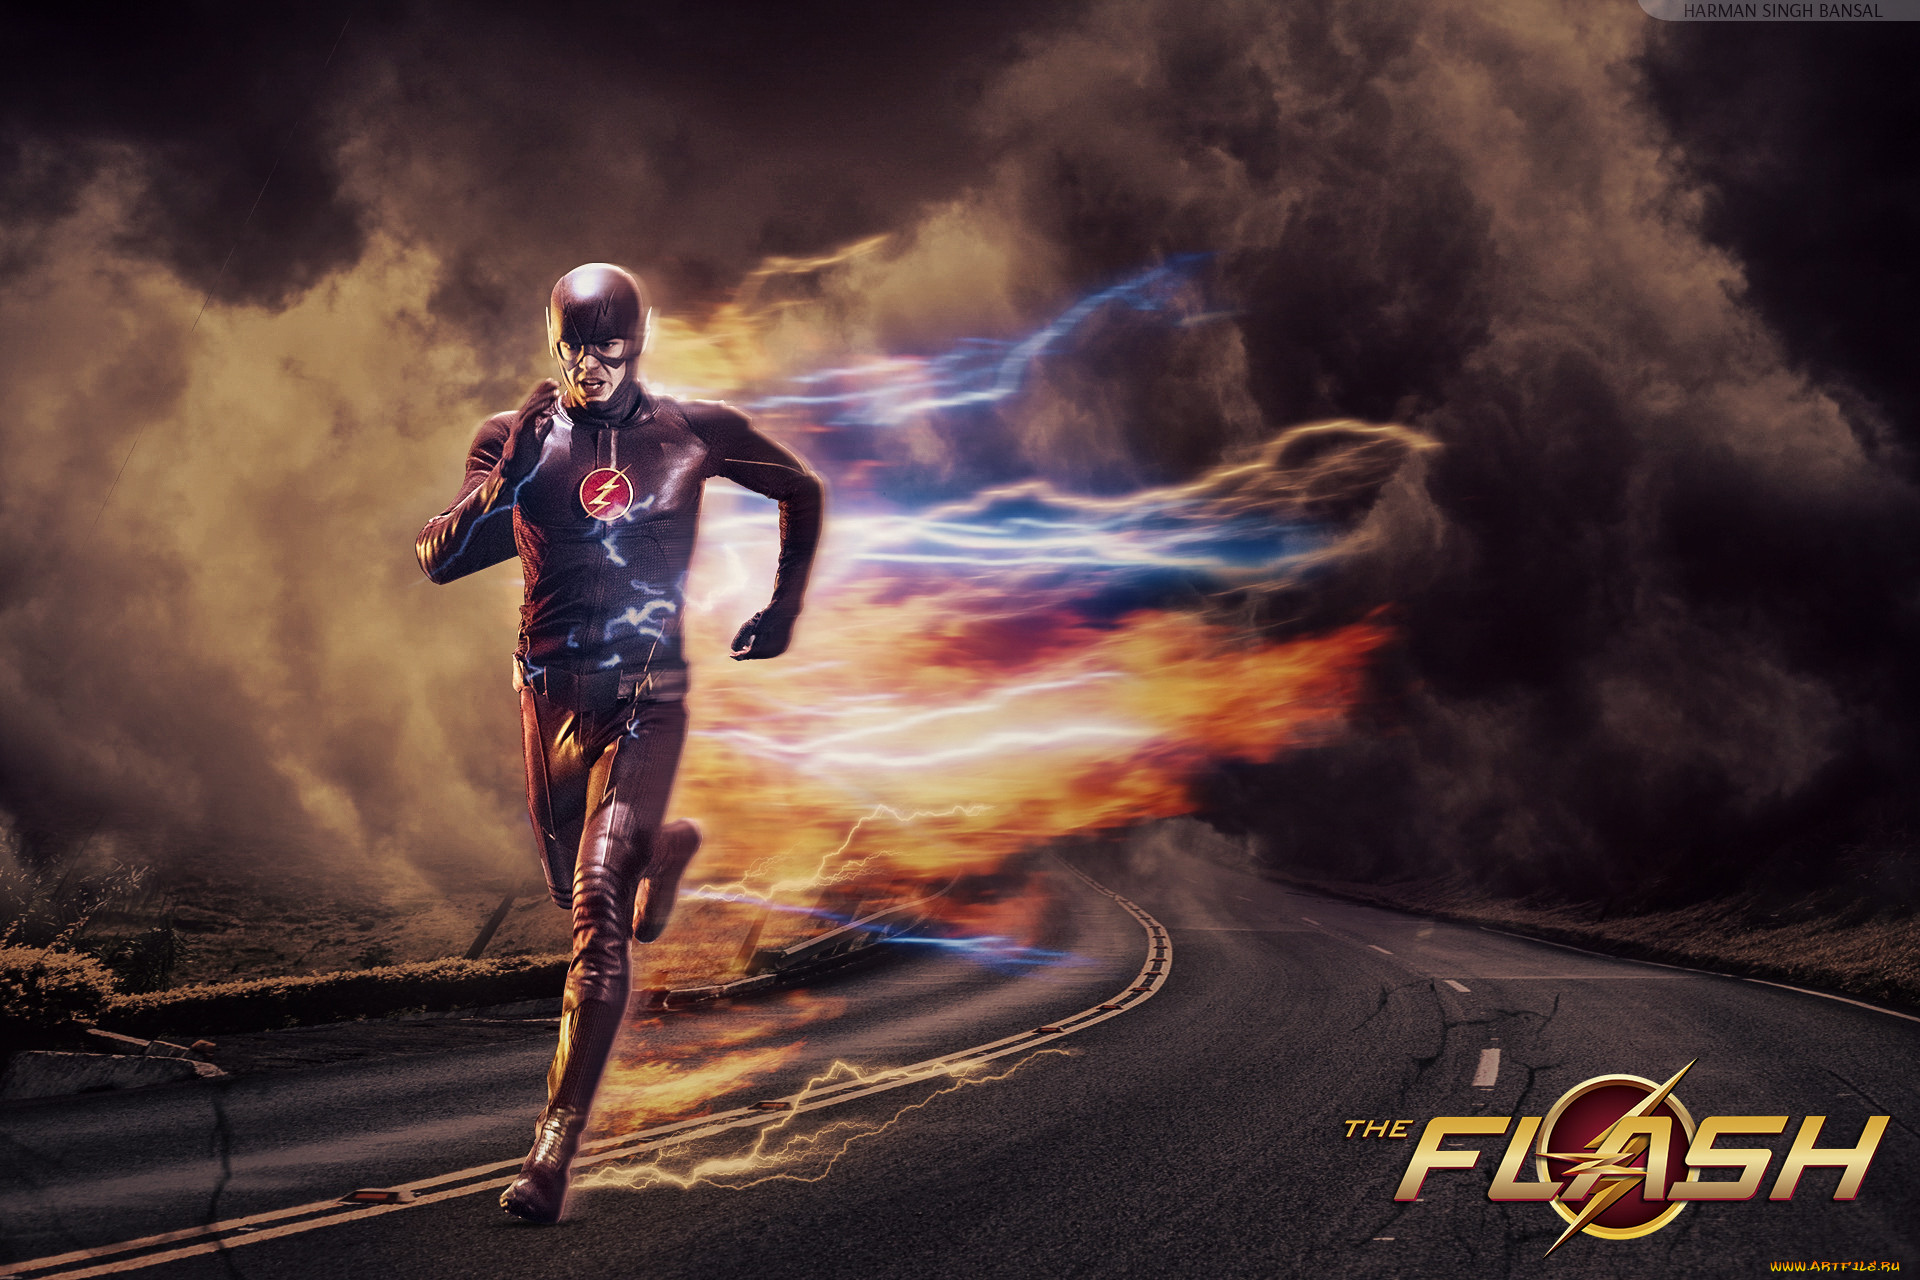  , the flash , , the, flash, 2014